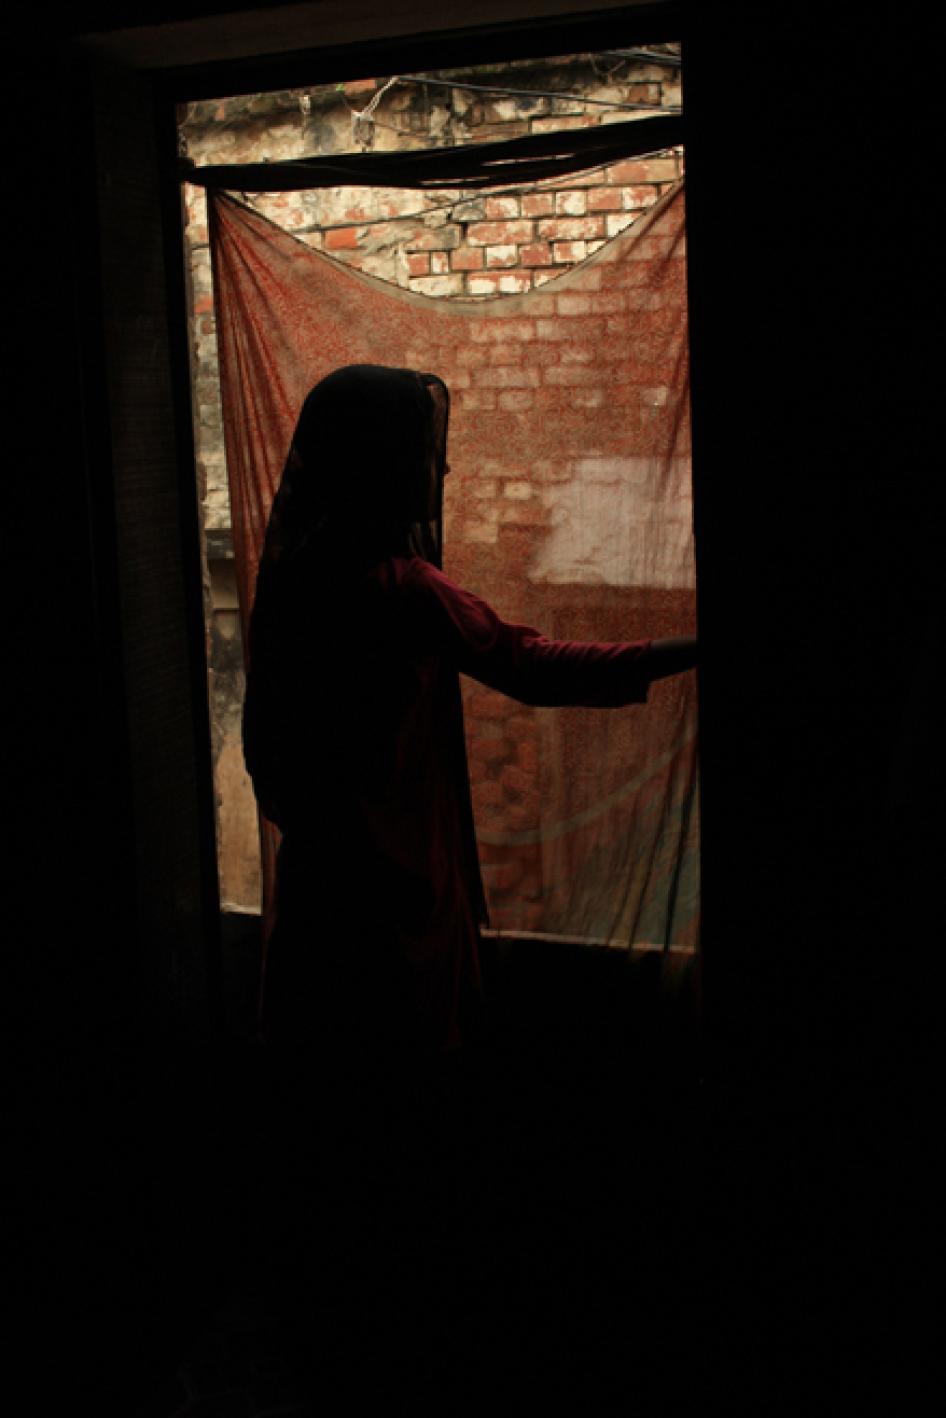 Indian Sexx Rape Forced - India: Child Sex Abuse Shielded by Silence and Neglect | Human Rights Watch